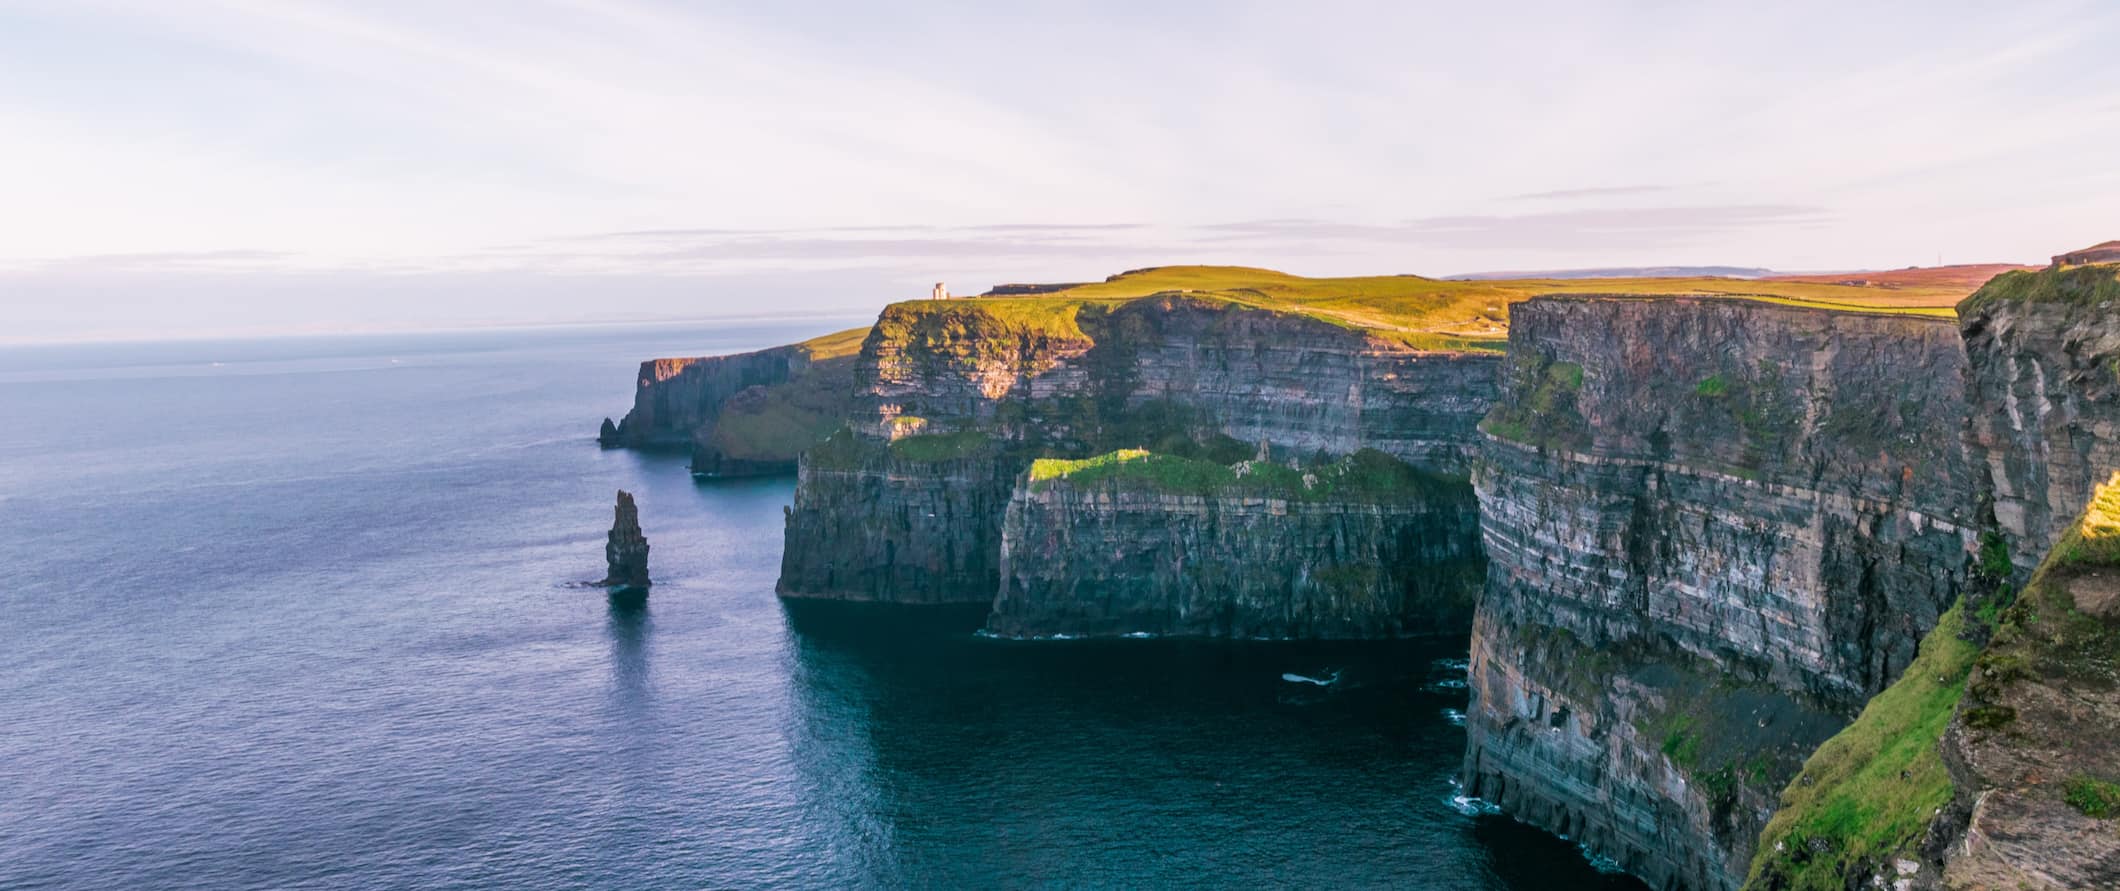 The beautiful Cliffs of Moher along the rugged coast of Ireland